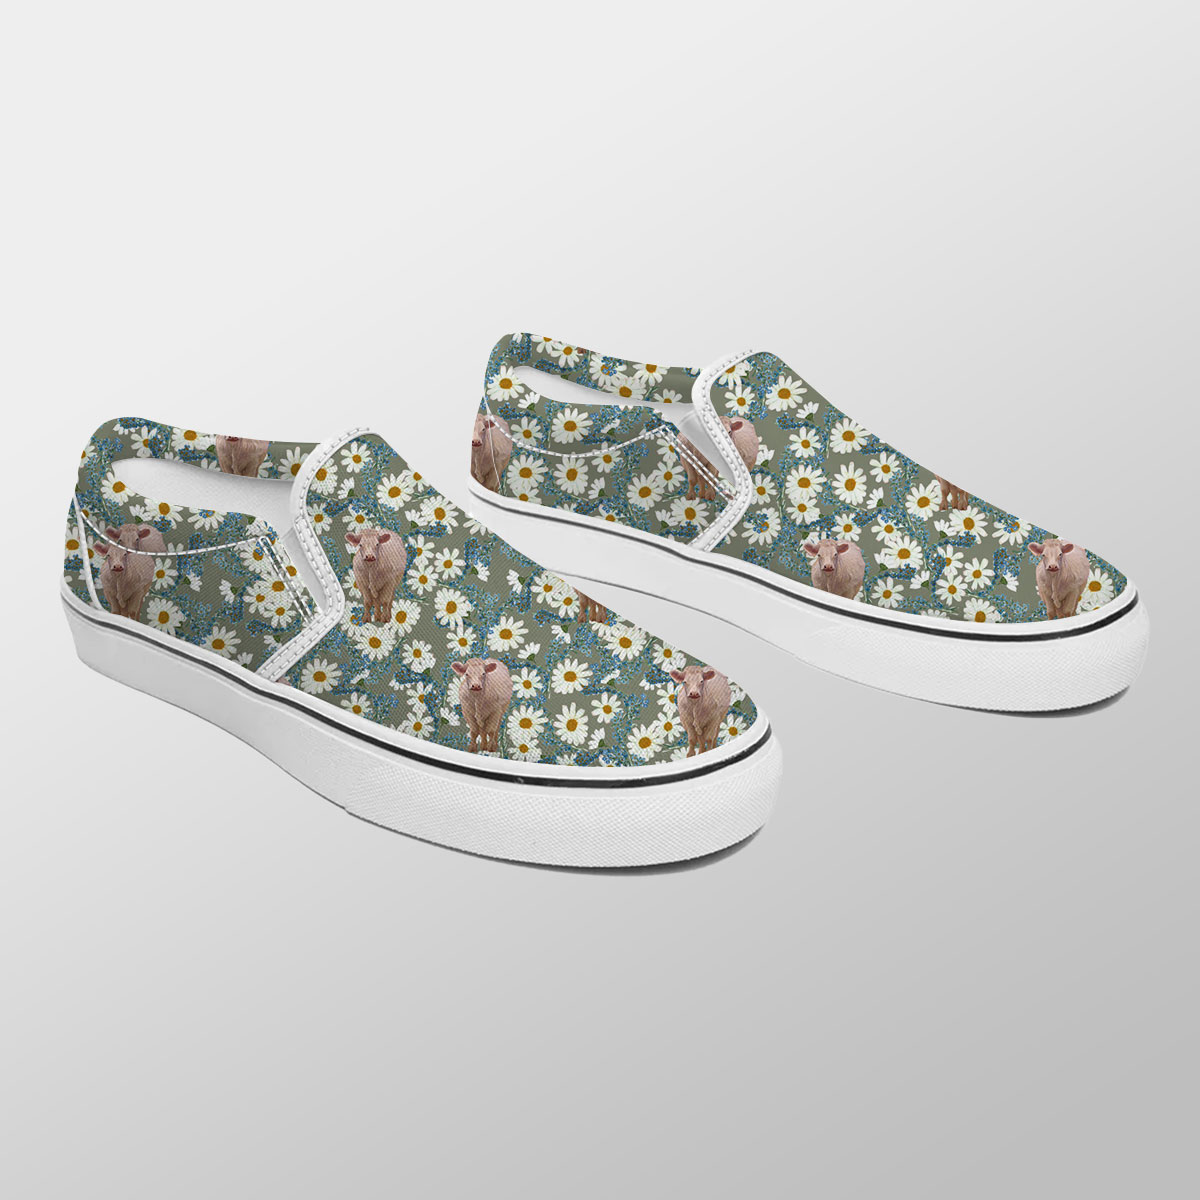 Charolais Camomilles Flower Grey Pattern Slip On Sneakers